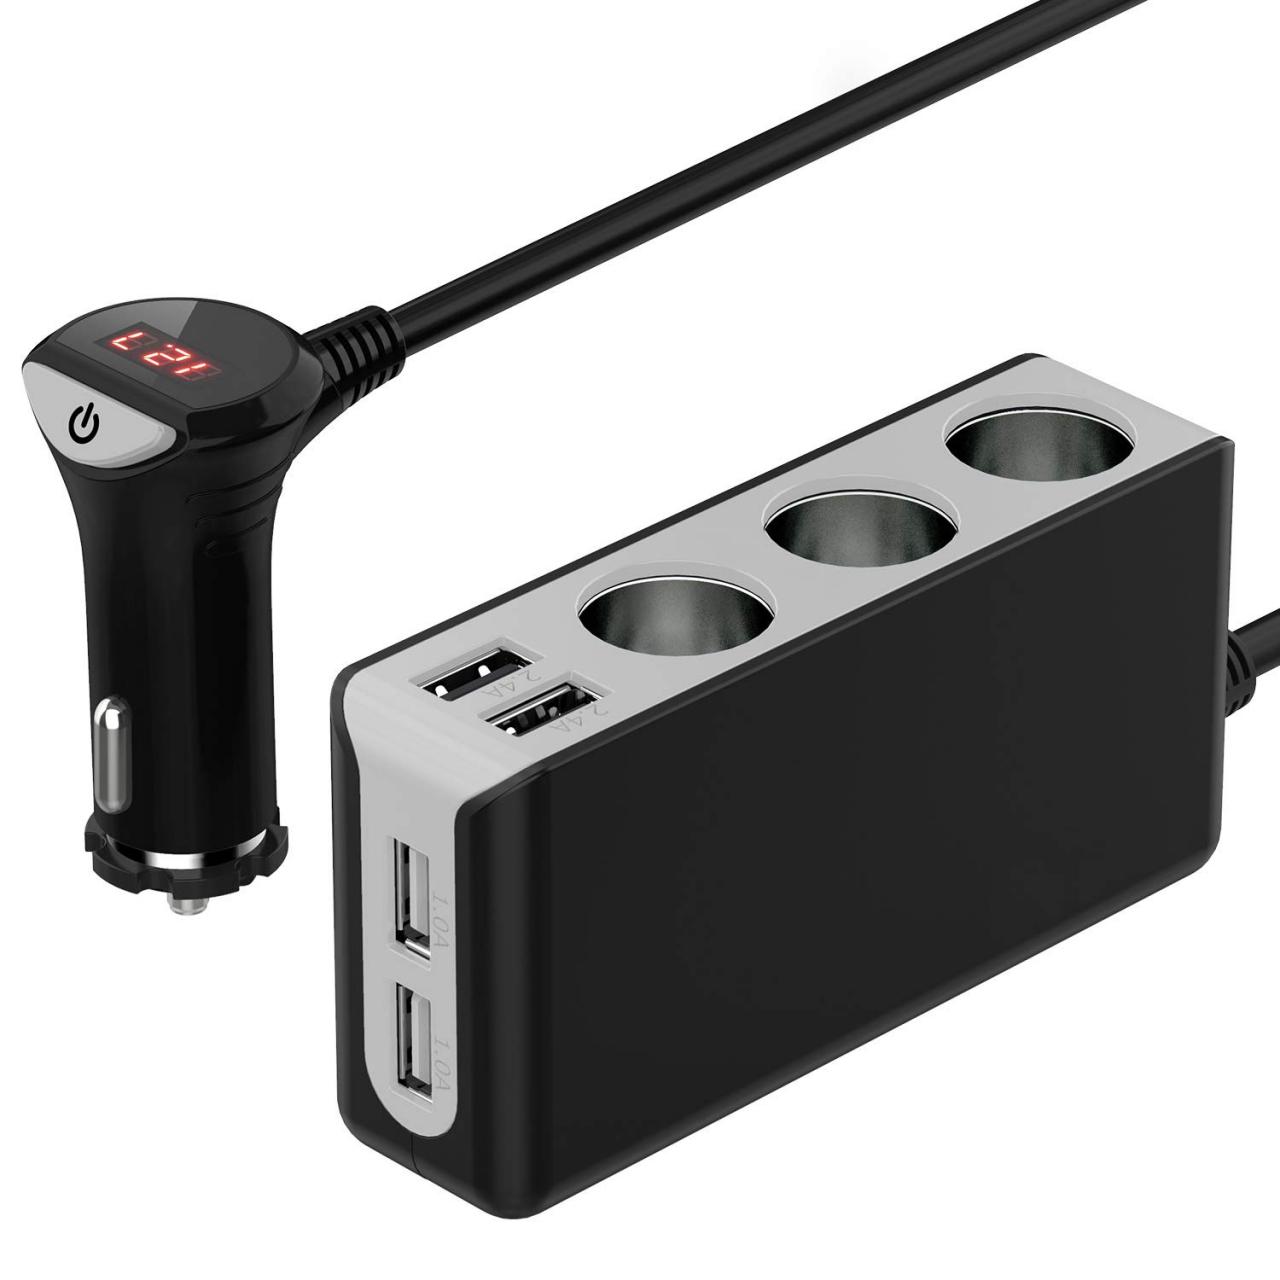 Buy HiGoing Cigarette Lighter Splitter, 100W 12V24V 3 Sockets 4 USB Car  Charger Adapter DC Outlet with Replaceable 7A Fuse and Voltmeter Online in  India. B07GK17ZLG